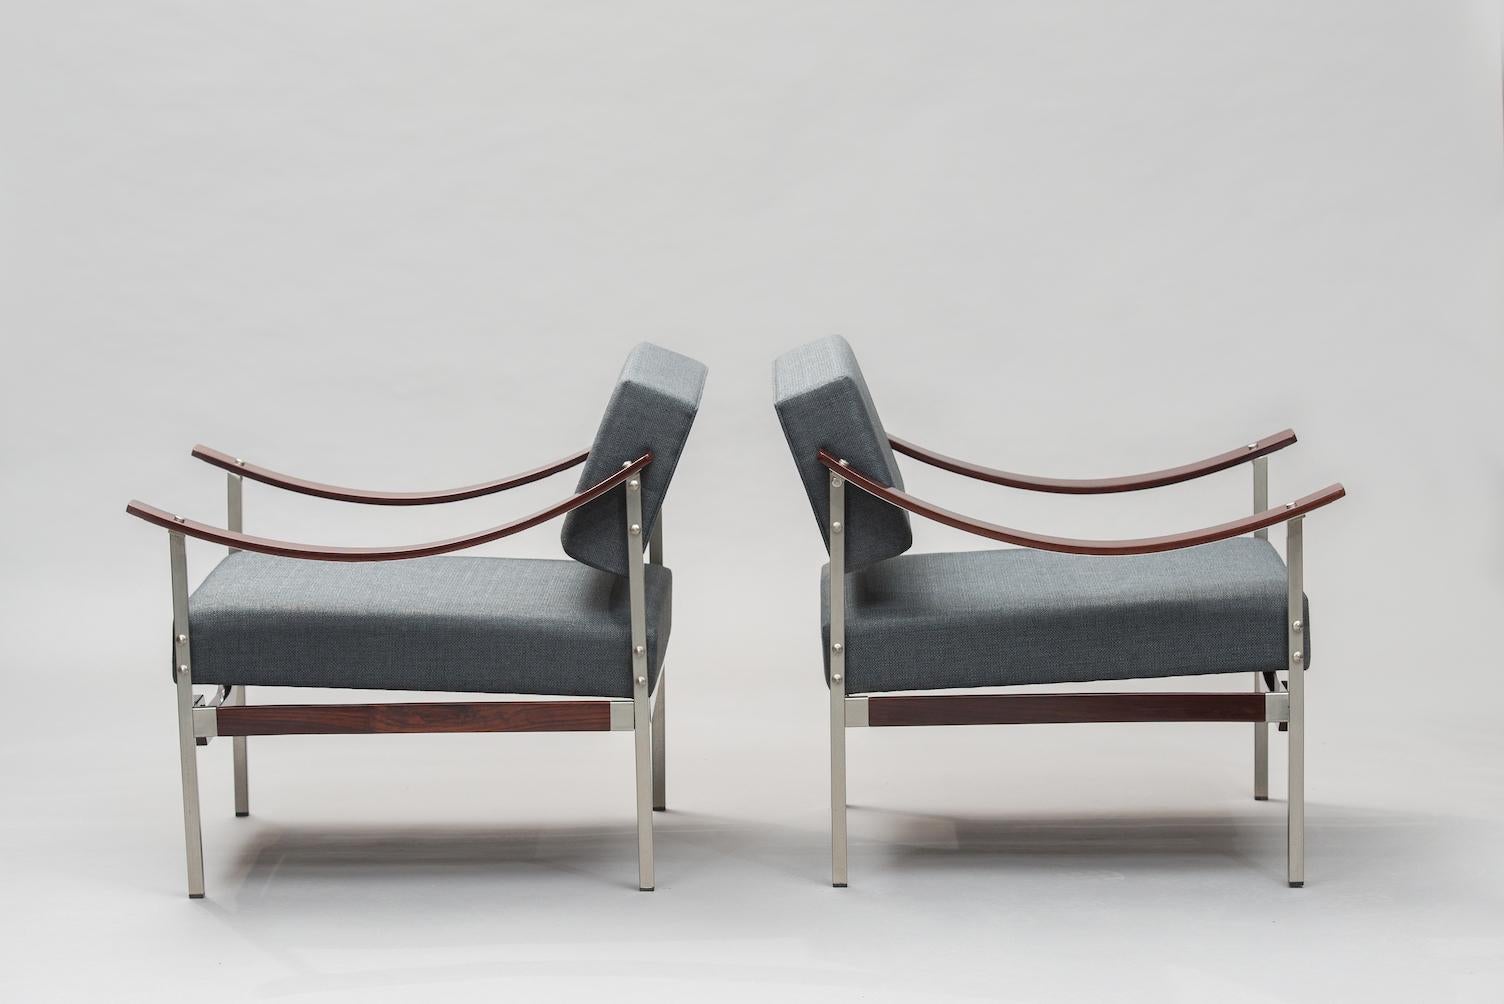 Italian Mid-Century Modern rosewood and chrome armchairs reupholstered in grey fabric.